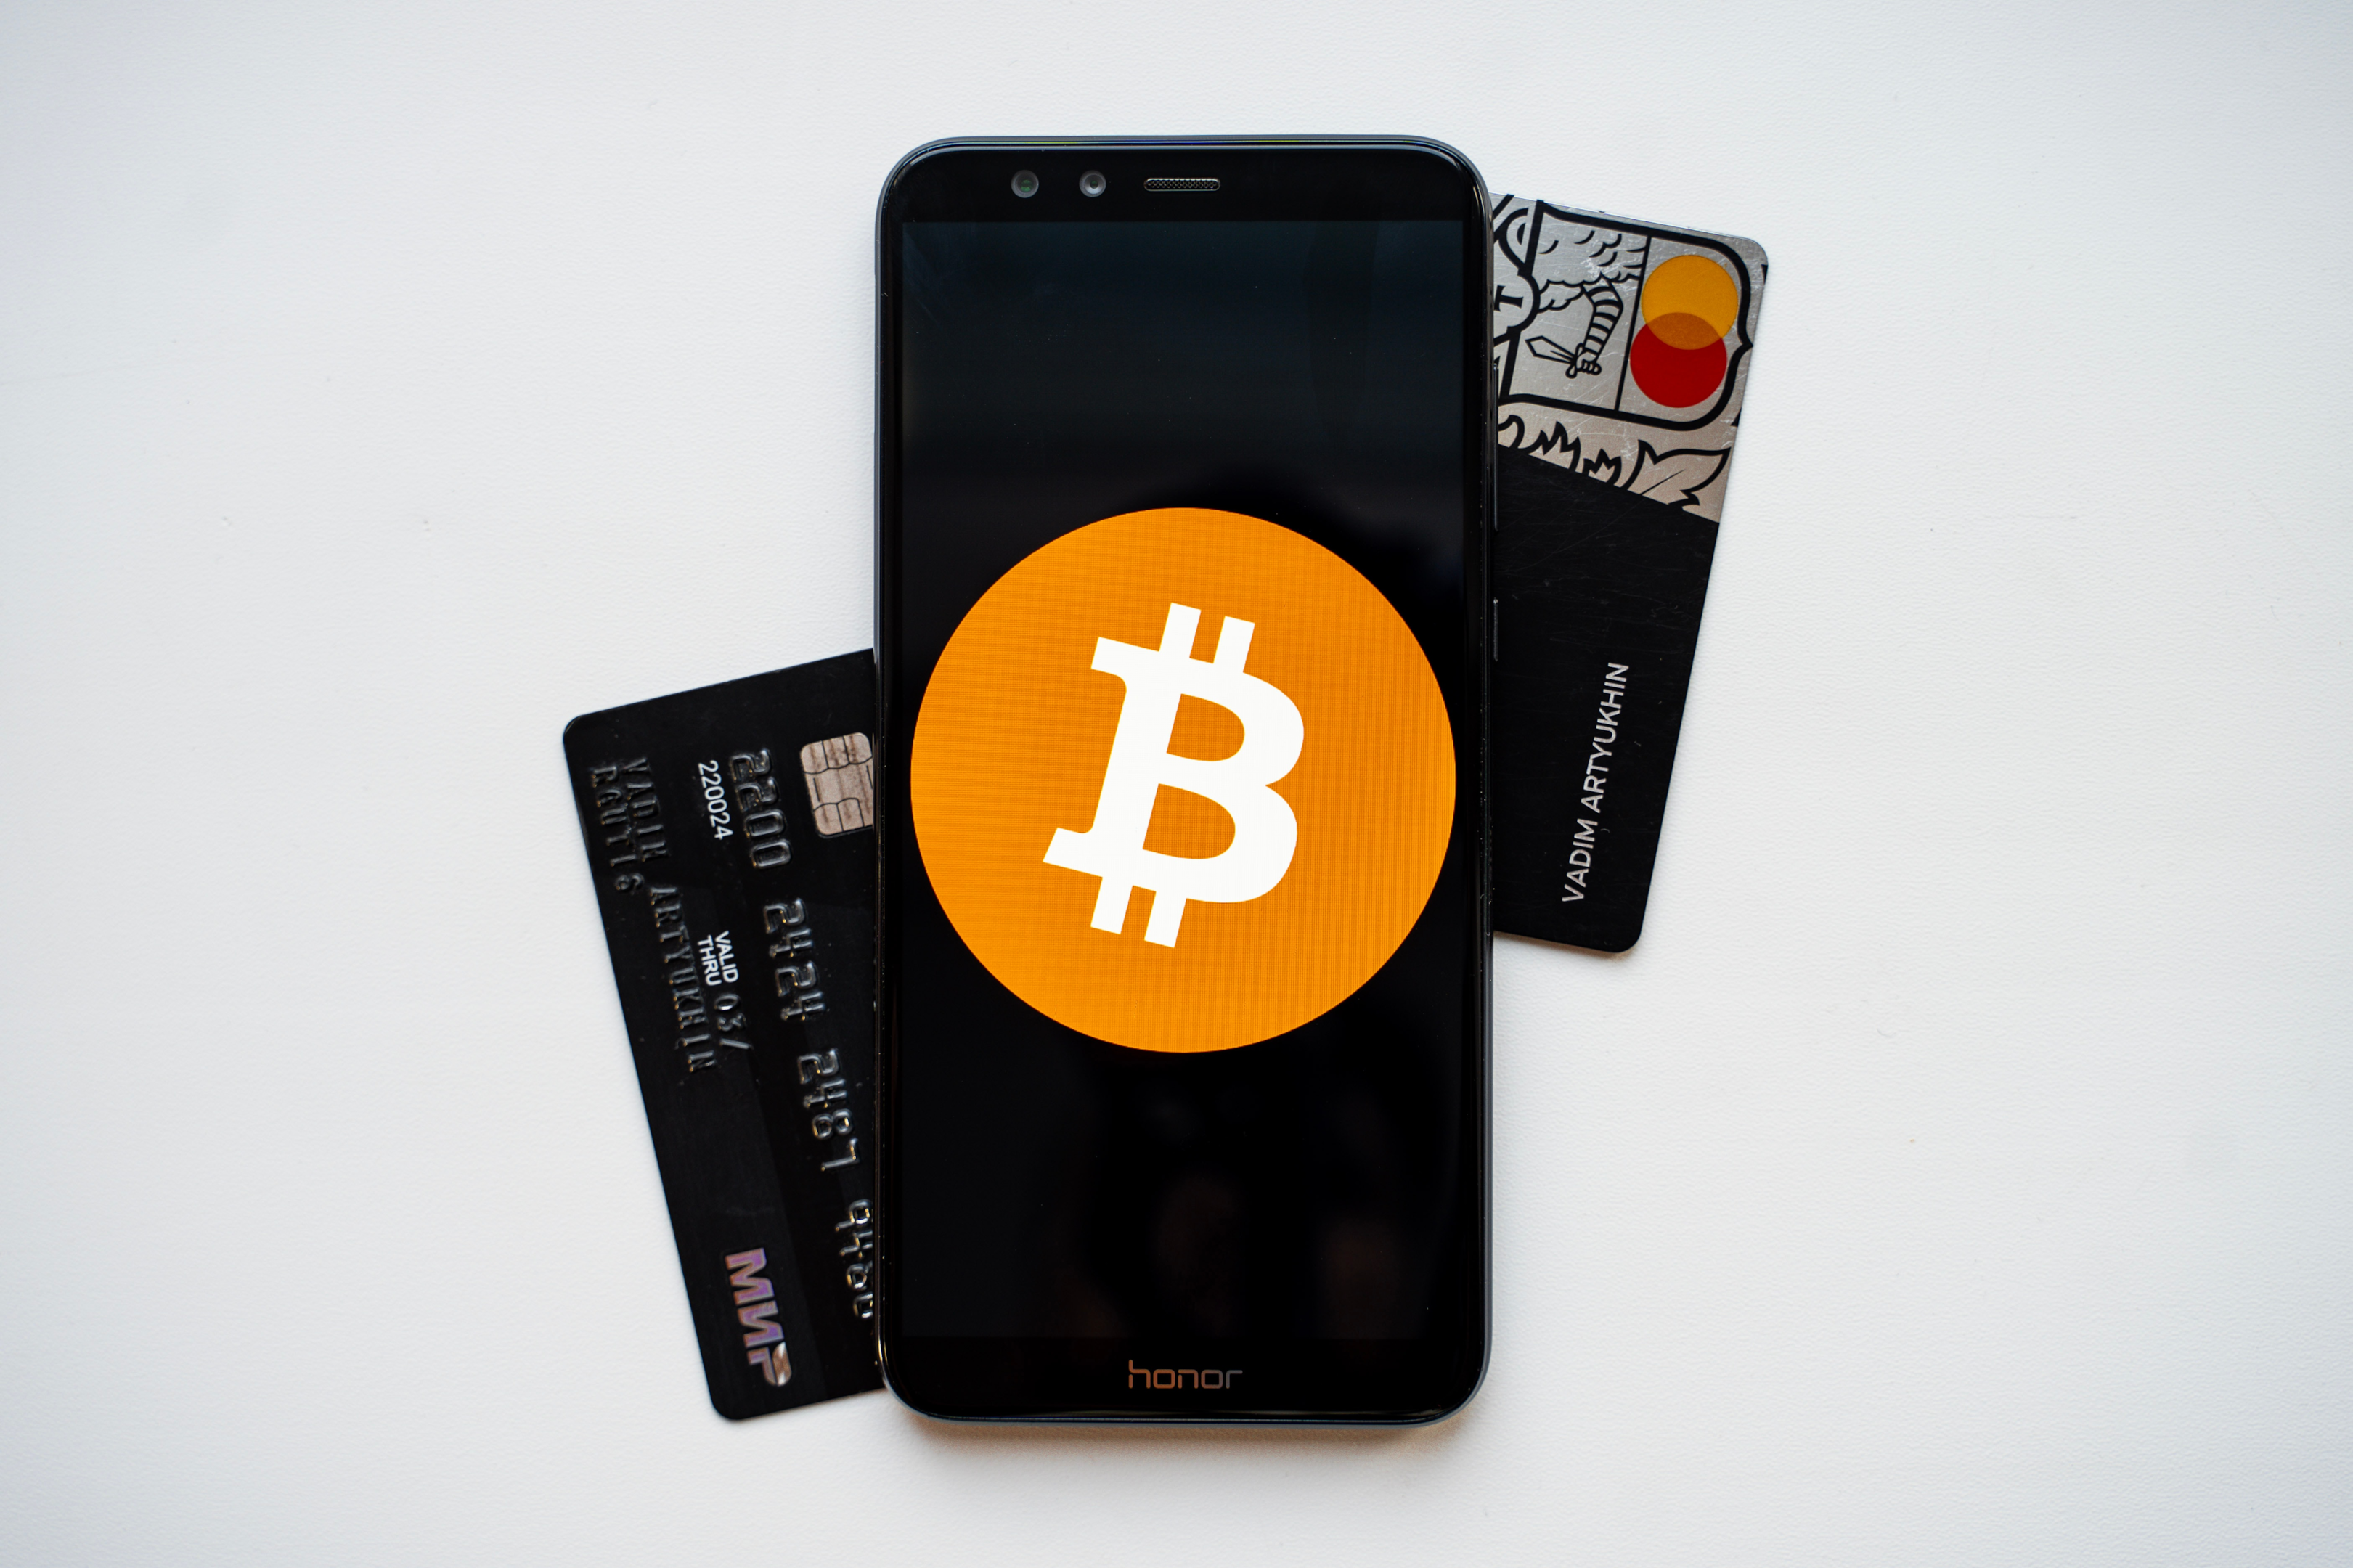 A user's private key may be susceptible to malicious software if security measures are not taken to protect cryptocurrency transactions via a hot wallet